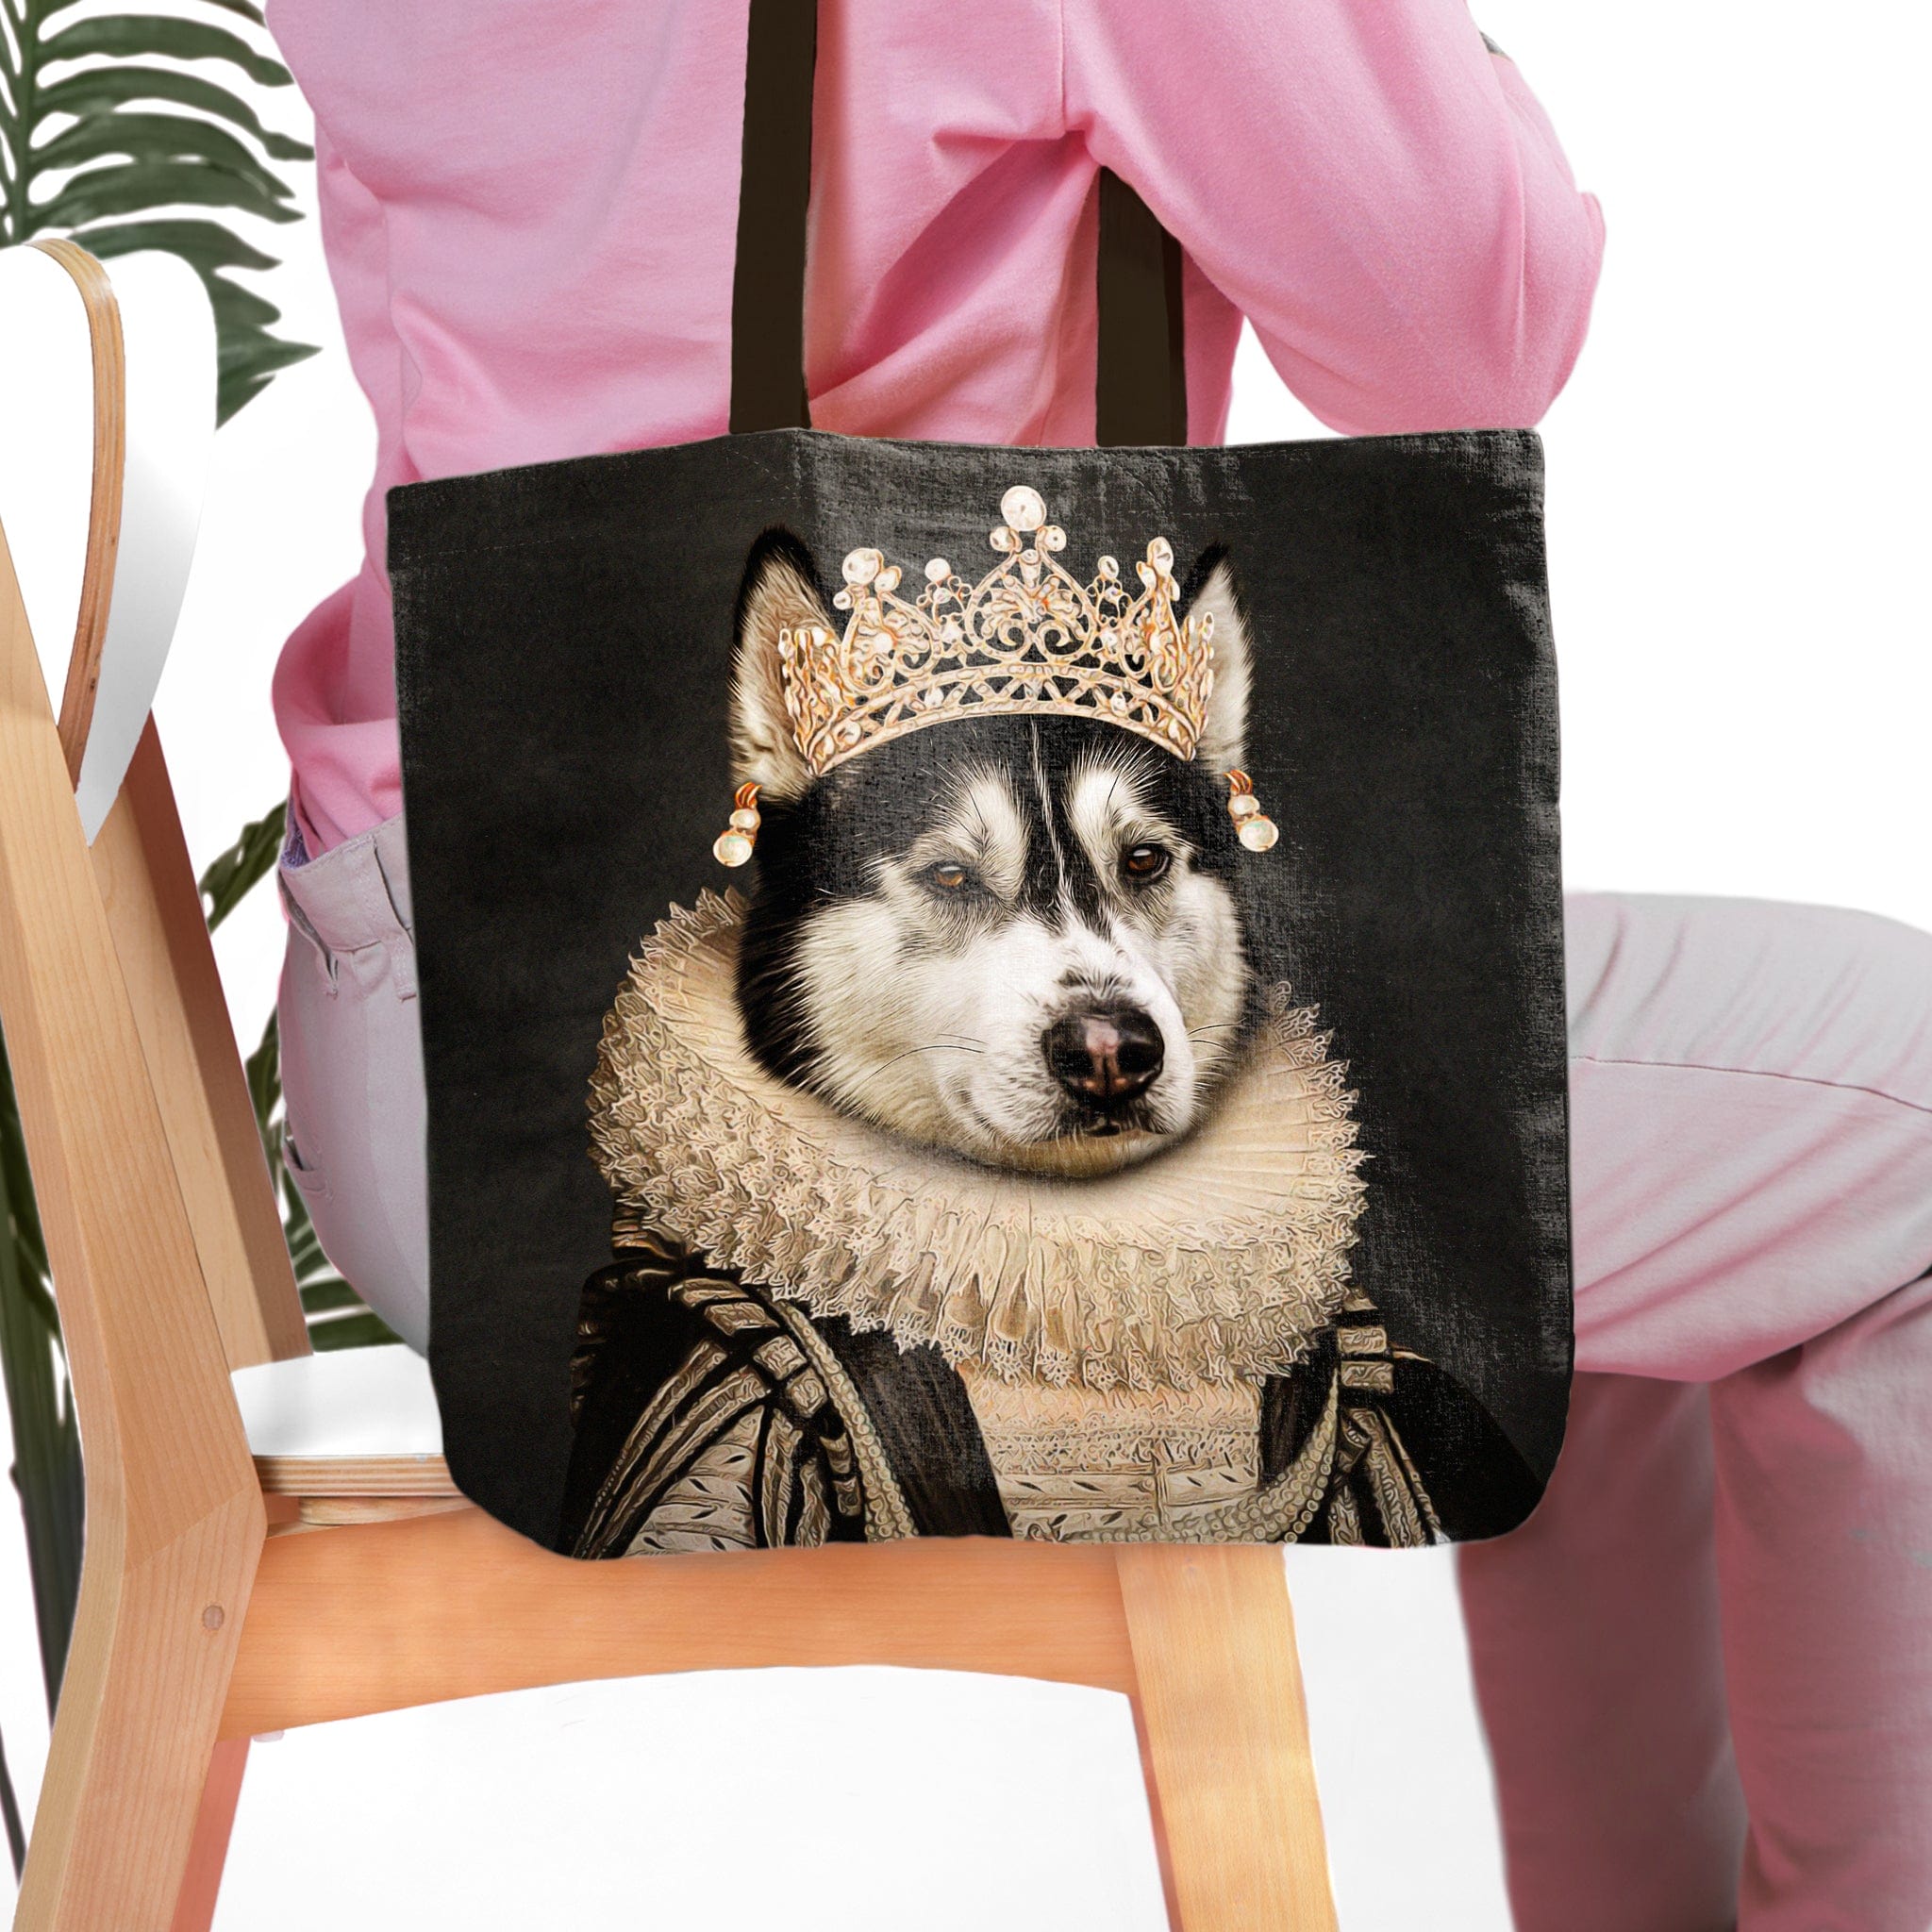 &#39;The Lady of Pearls&#39; Personalized Tote Bag